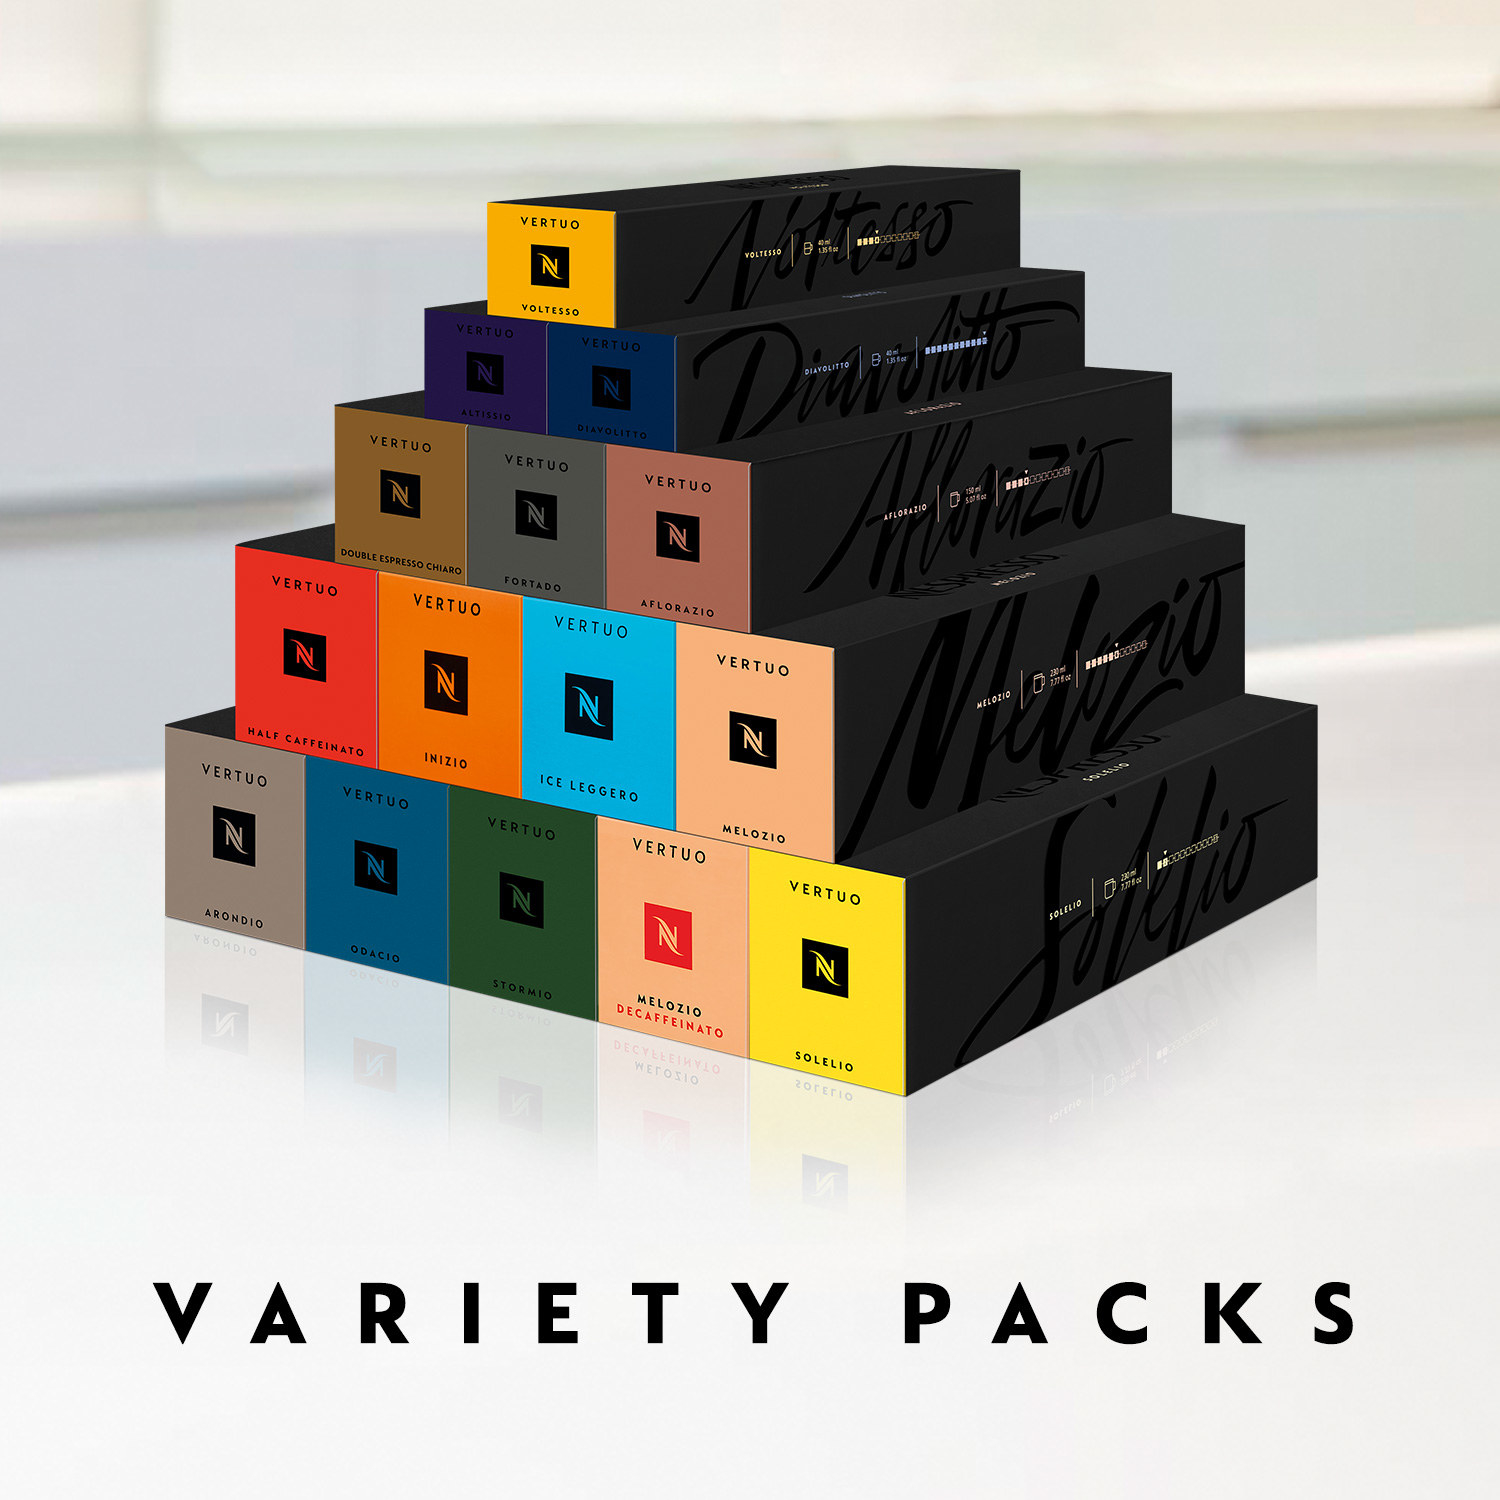 the variety pack